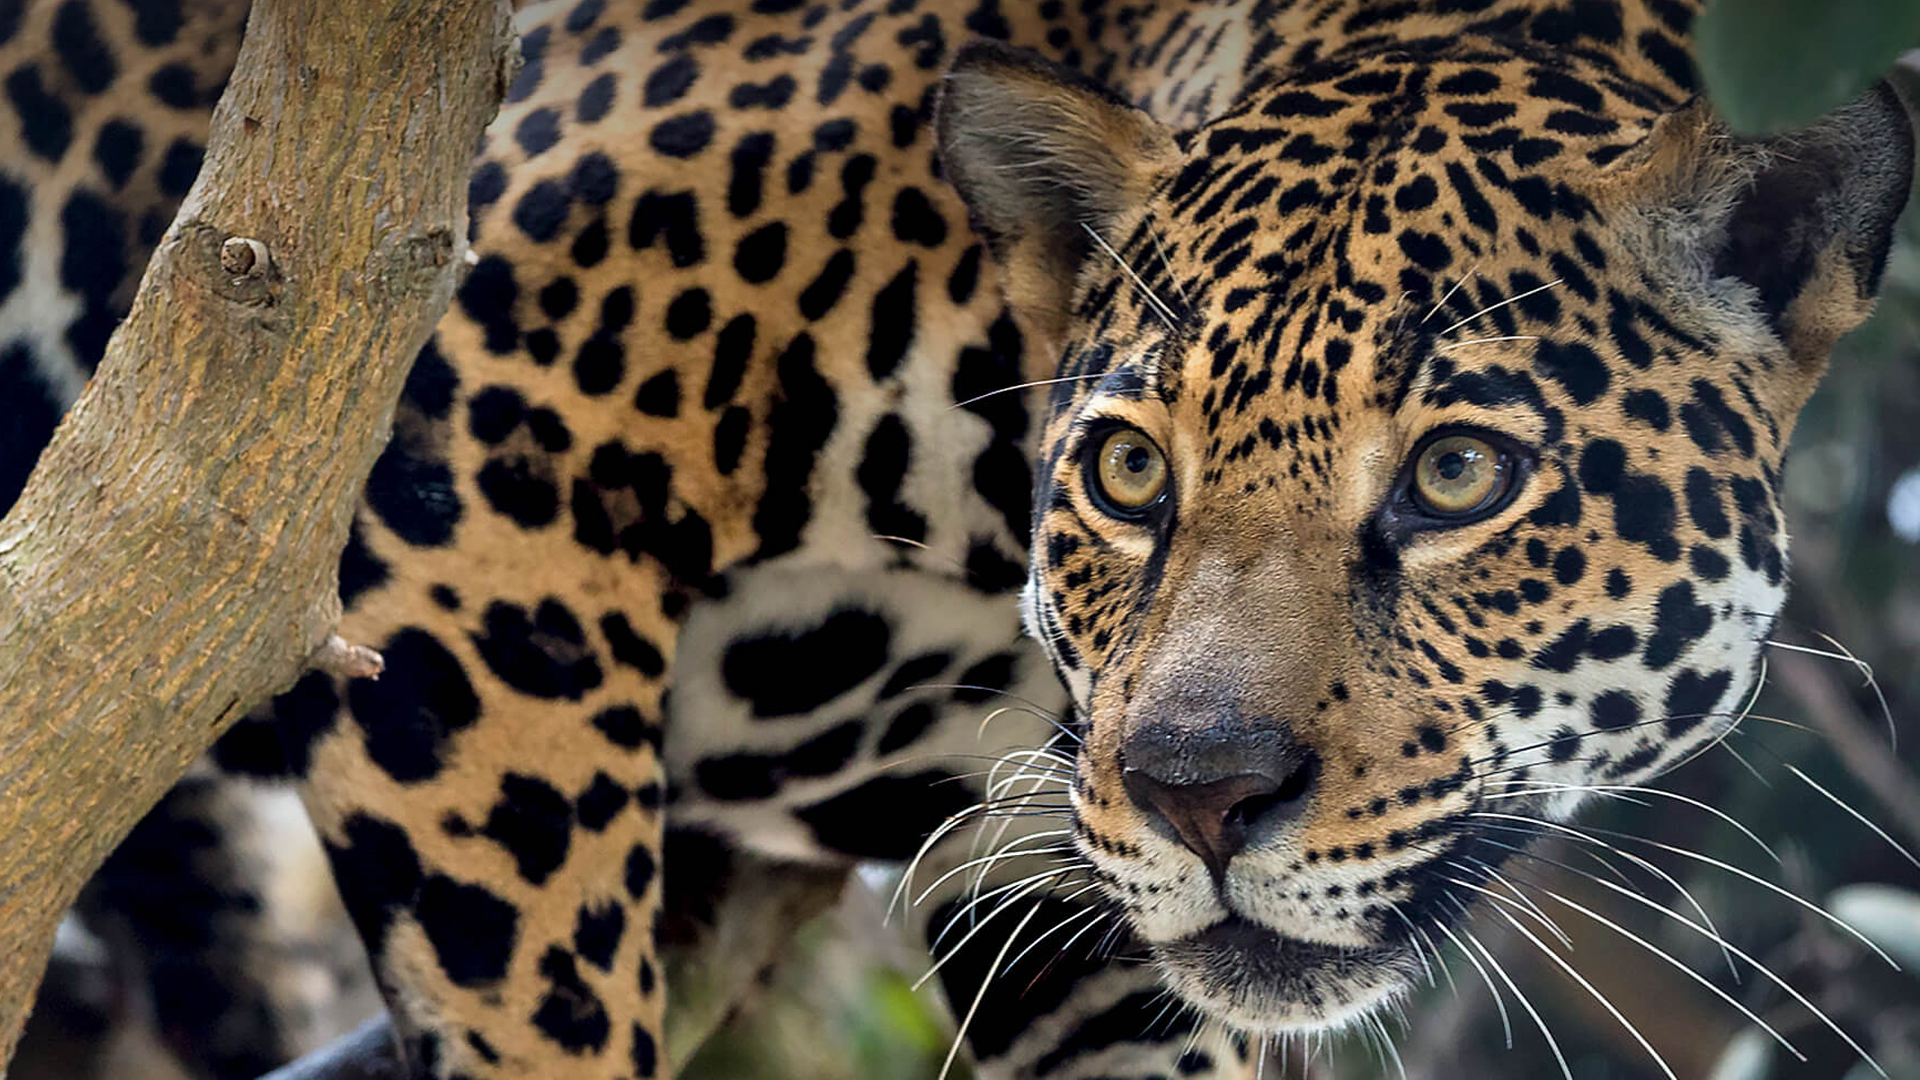 A jaguar peers out from under a tree branch